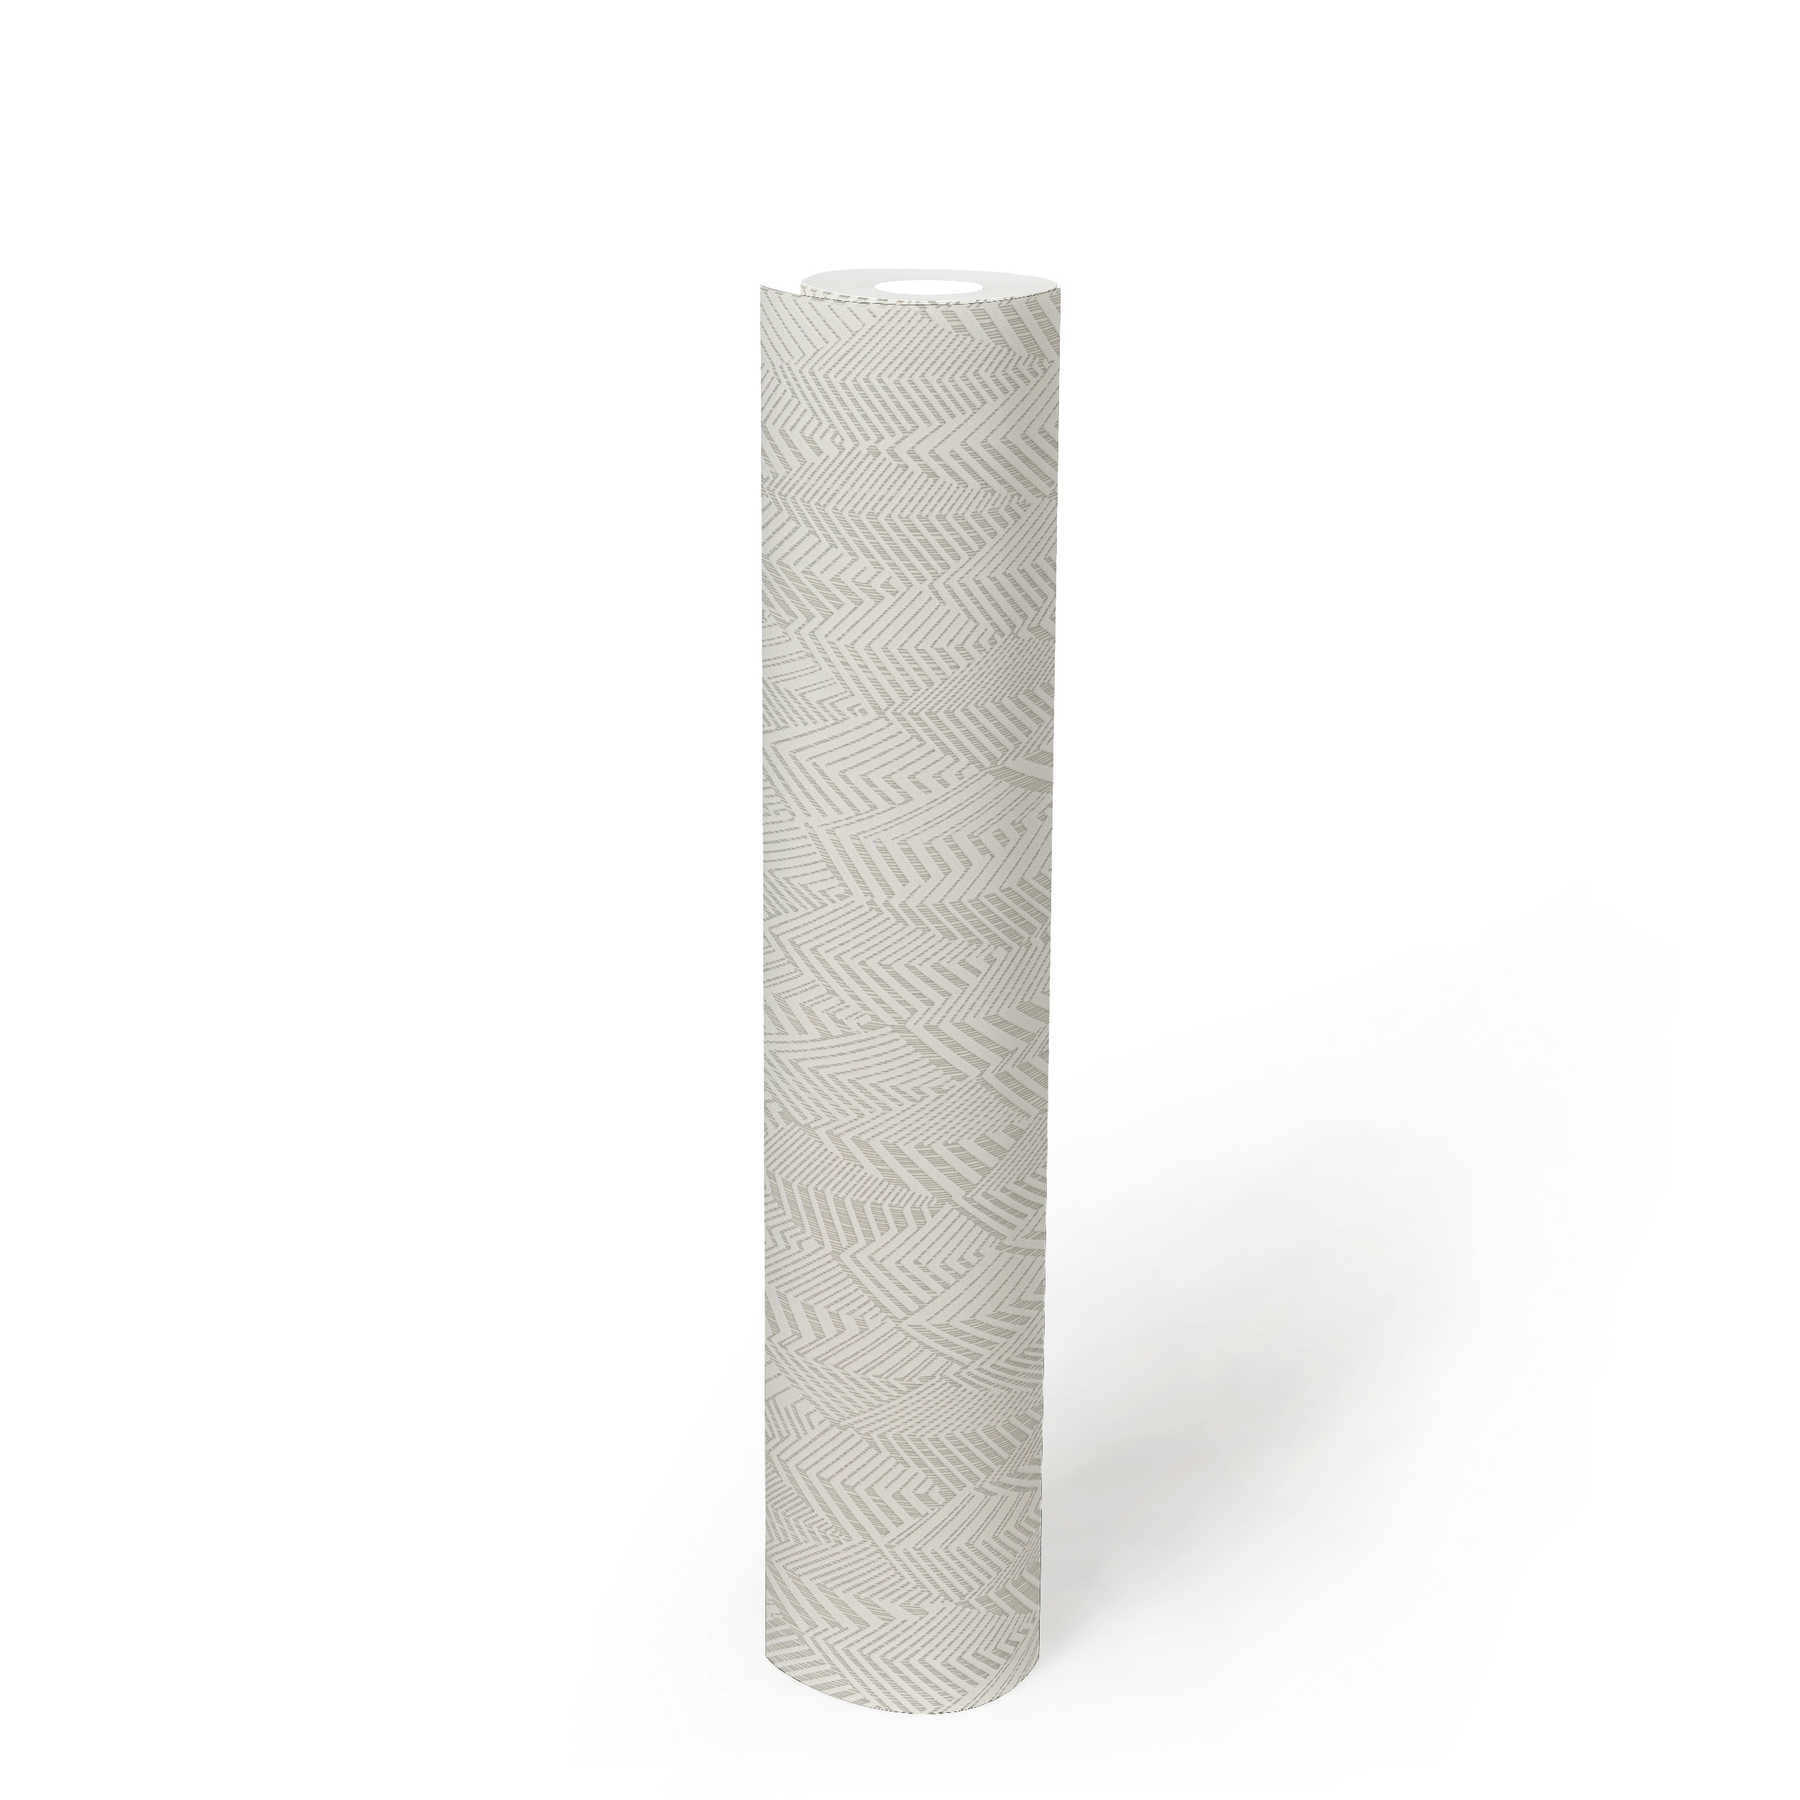             Plain wallpaper with abstract line pattern - cream, white
        